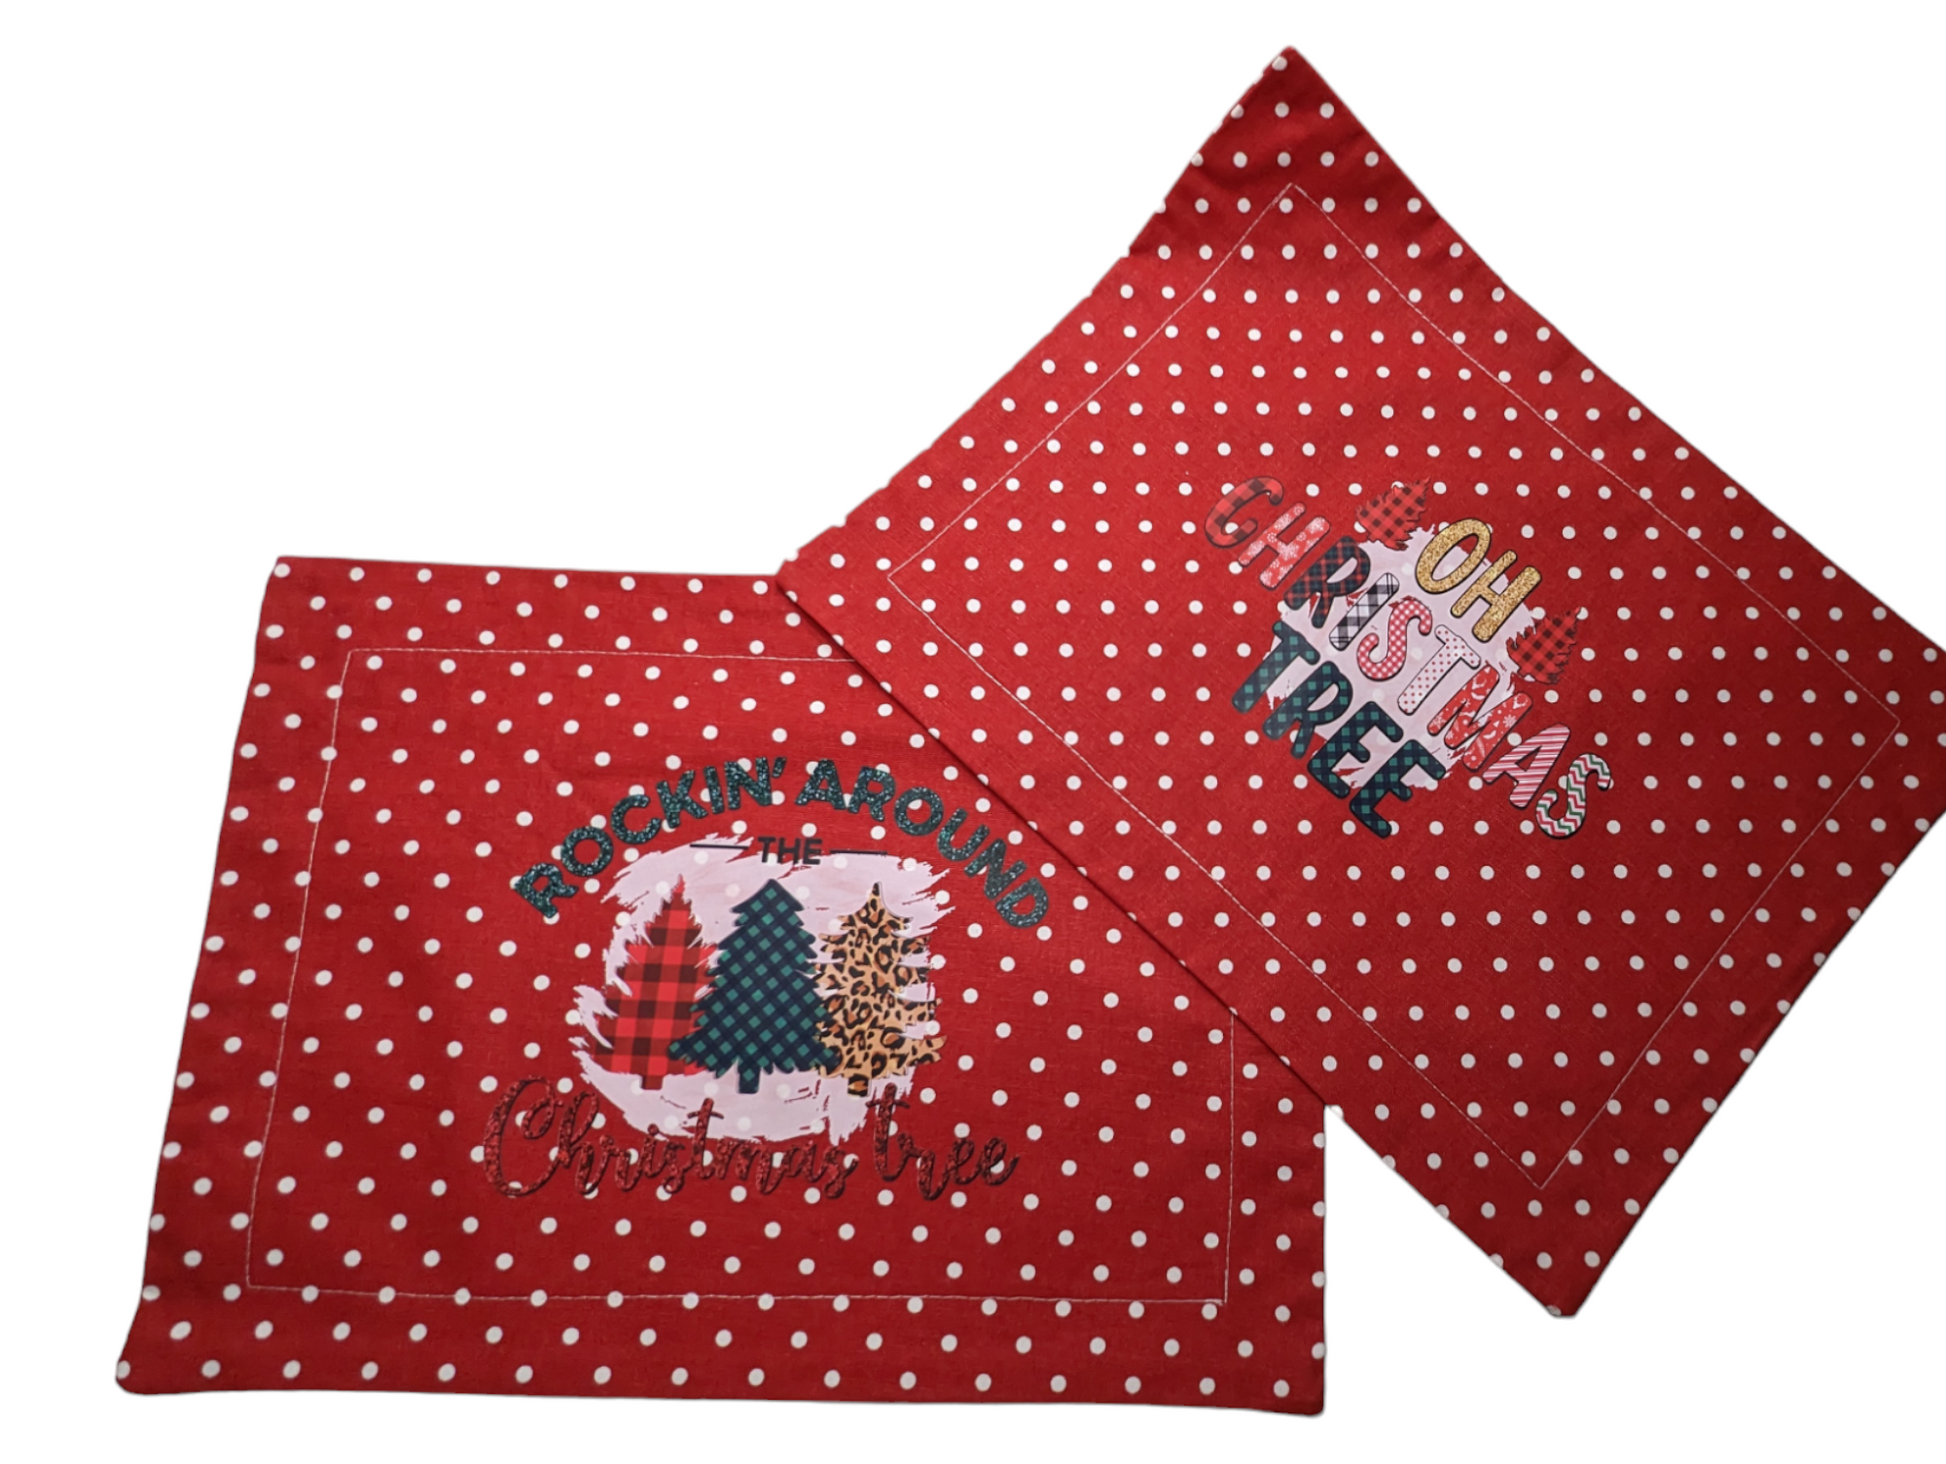 Red White Polka Dot Graphic Oh Christmas Tree, Rocking Around or Winter Set of 2 Washable Placemats